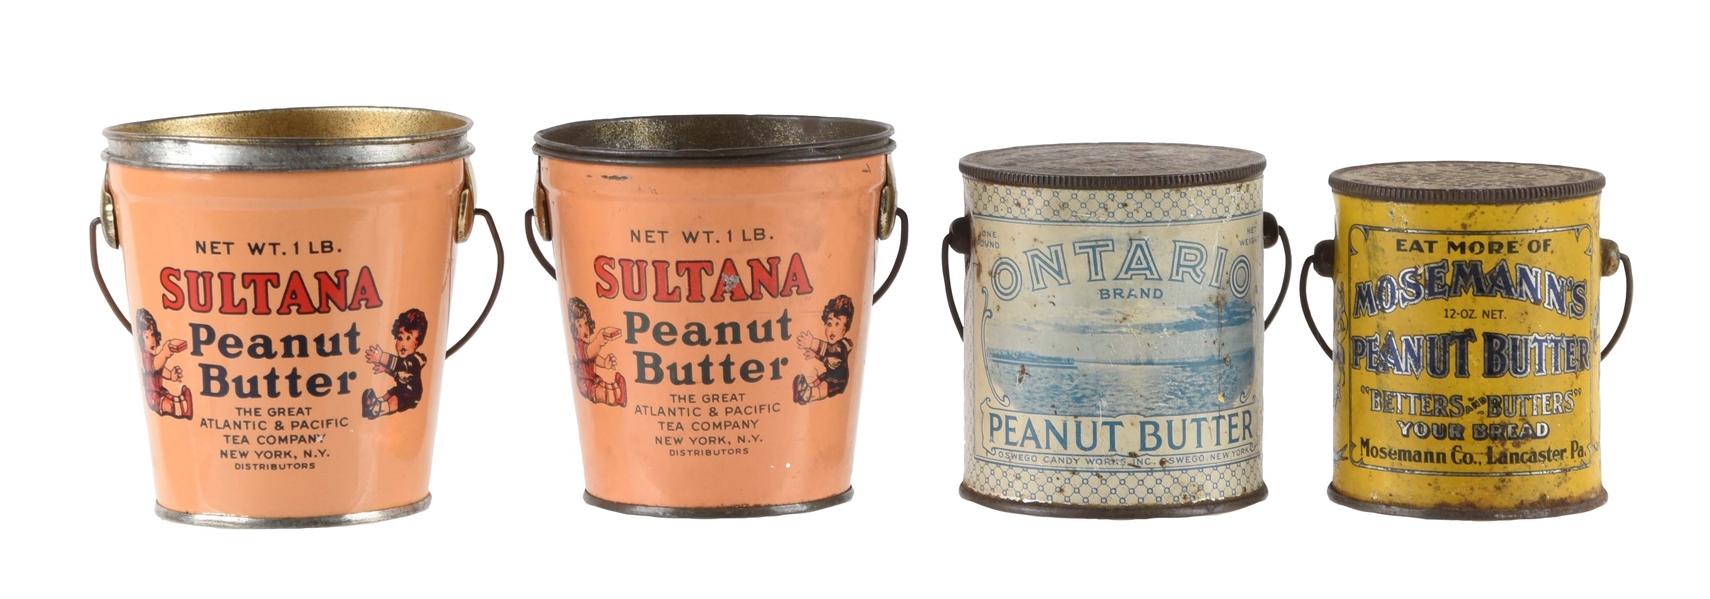 LOT OF 4: EARLY ADVERTISING PEANUT BUTTER TINS.